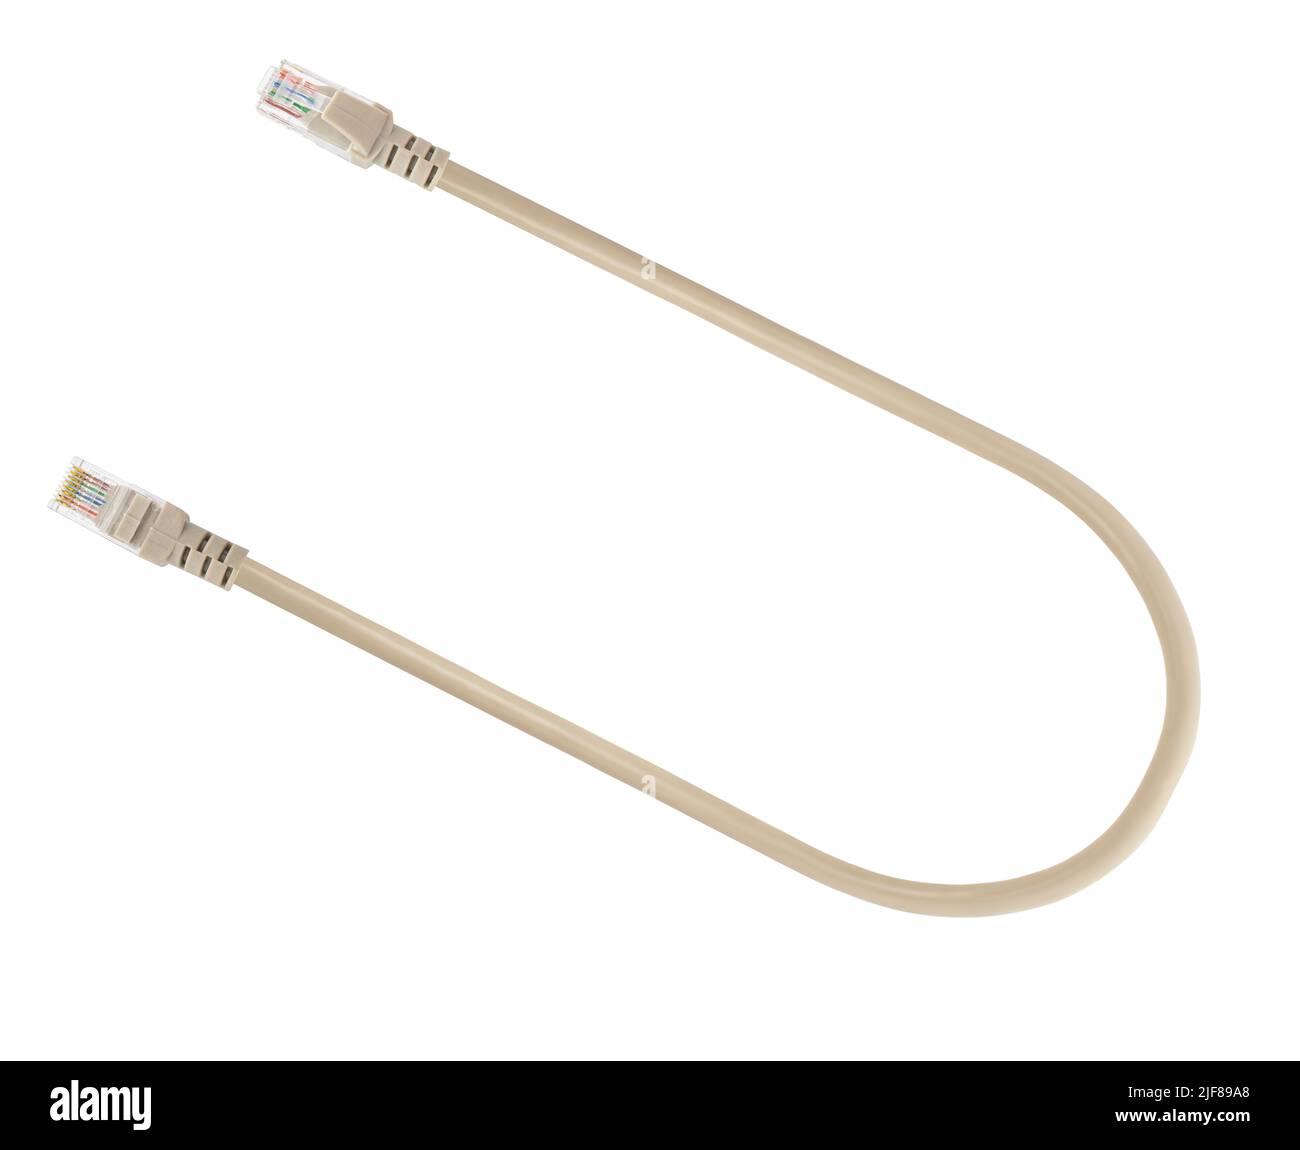 cable with RJ-45 connector, connector for wired internet connection on a white background Stock Photo